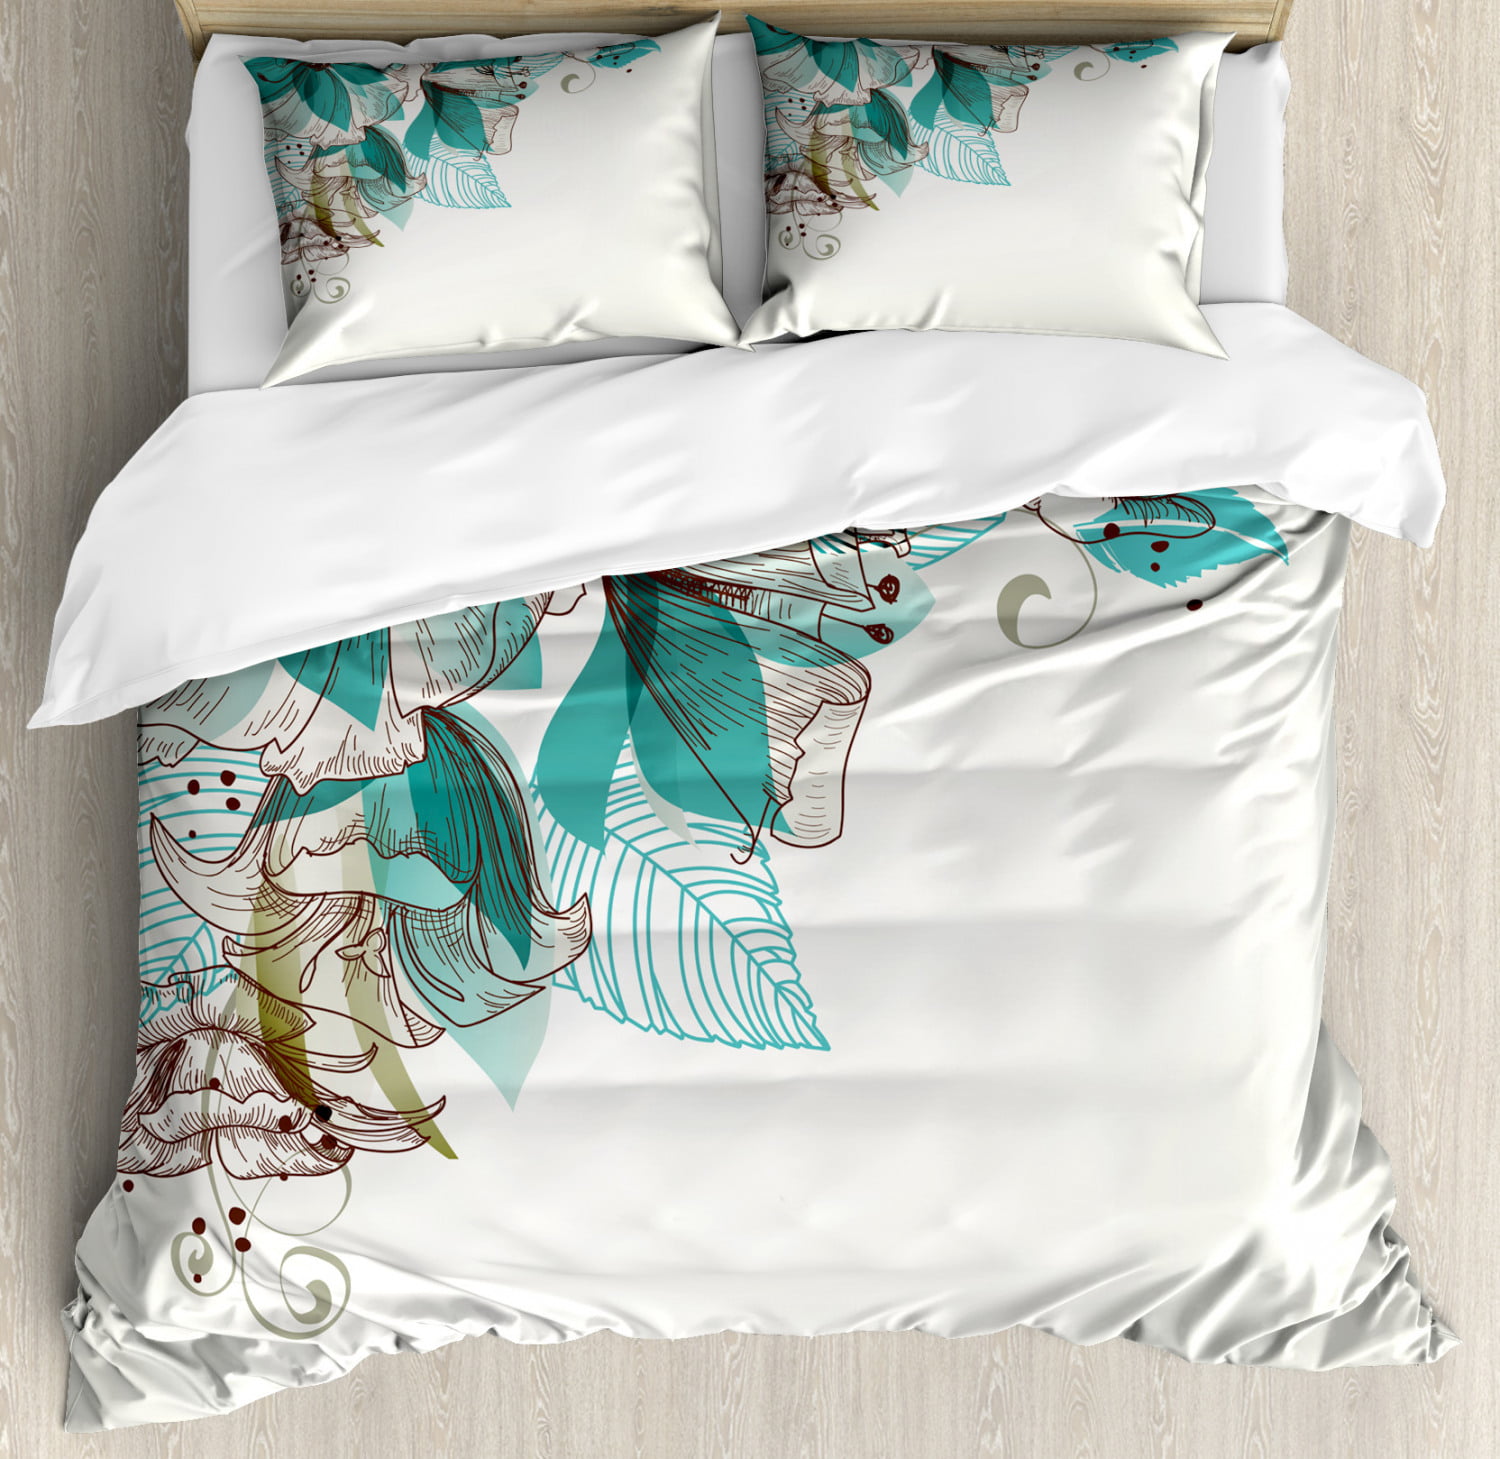 Turquoise Duvet Cover Set King Size, Black And Turquoise Duvet Cover